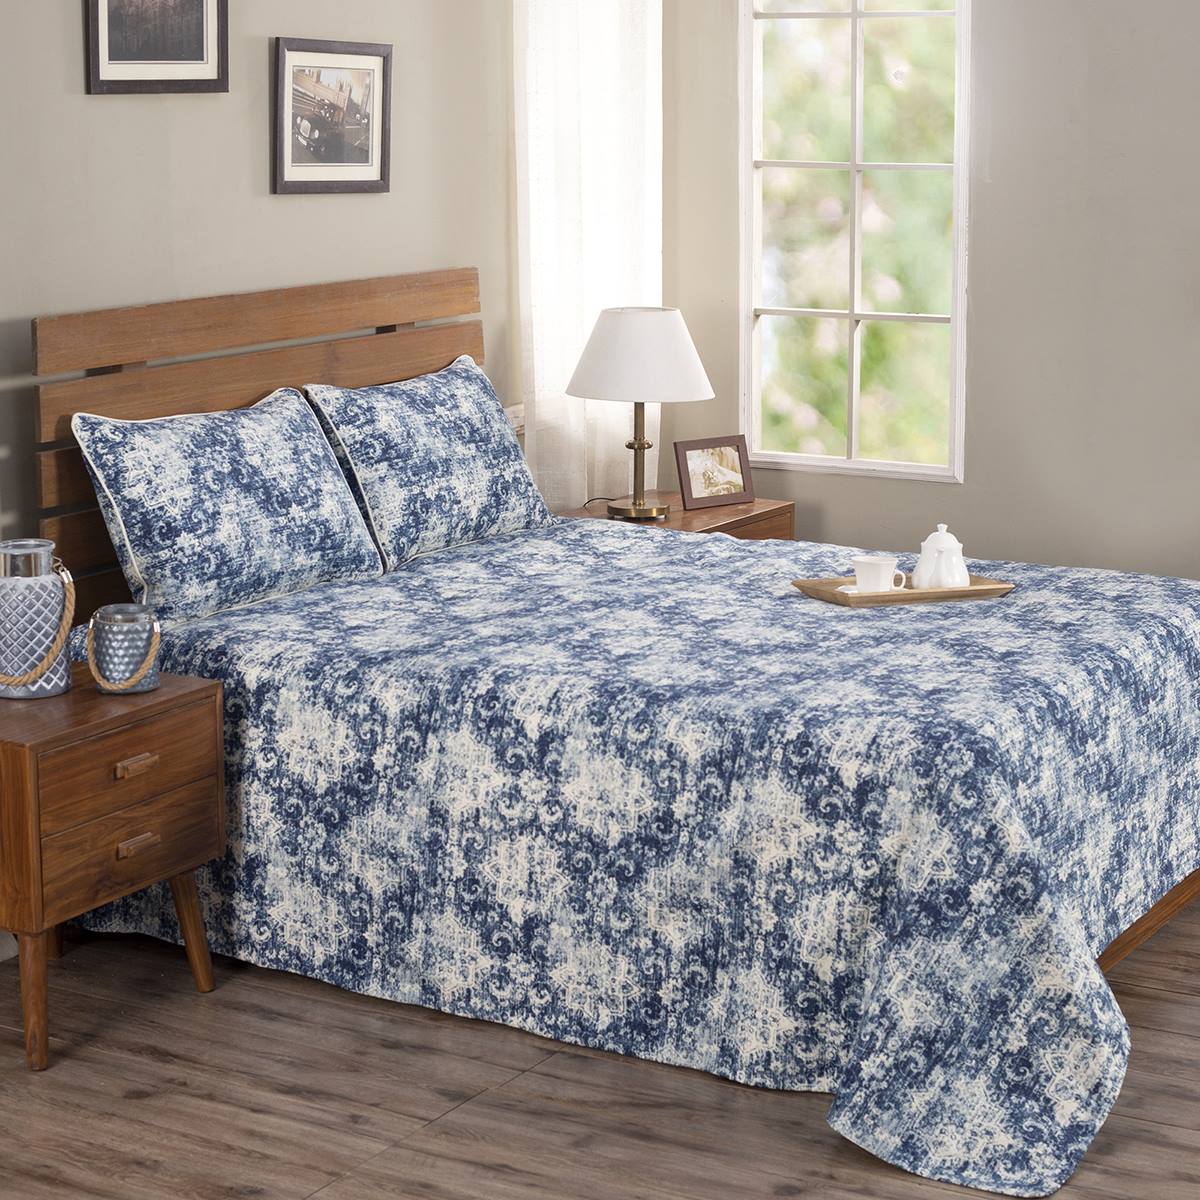 Rustic Clash Hyper Graphic Blue Printed 3 Pc Bed Cover Set